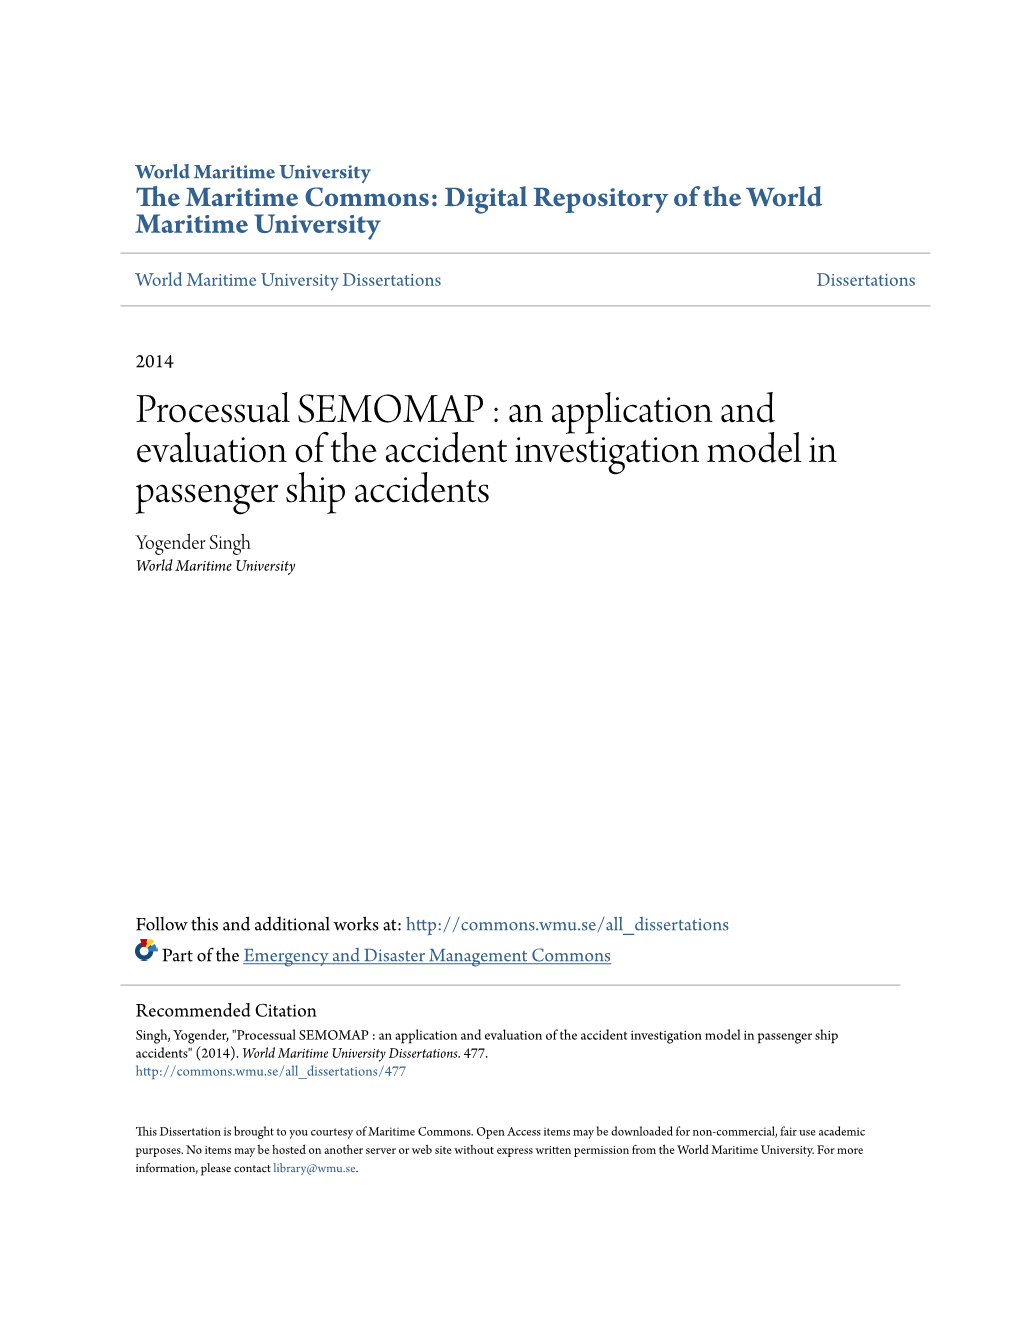 Processual SEMOMAP : an Application and Evaluation of the Accident Investigation Model in Passenger Ship Accidents Yogender Singh World Maritime University